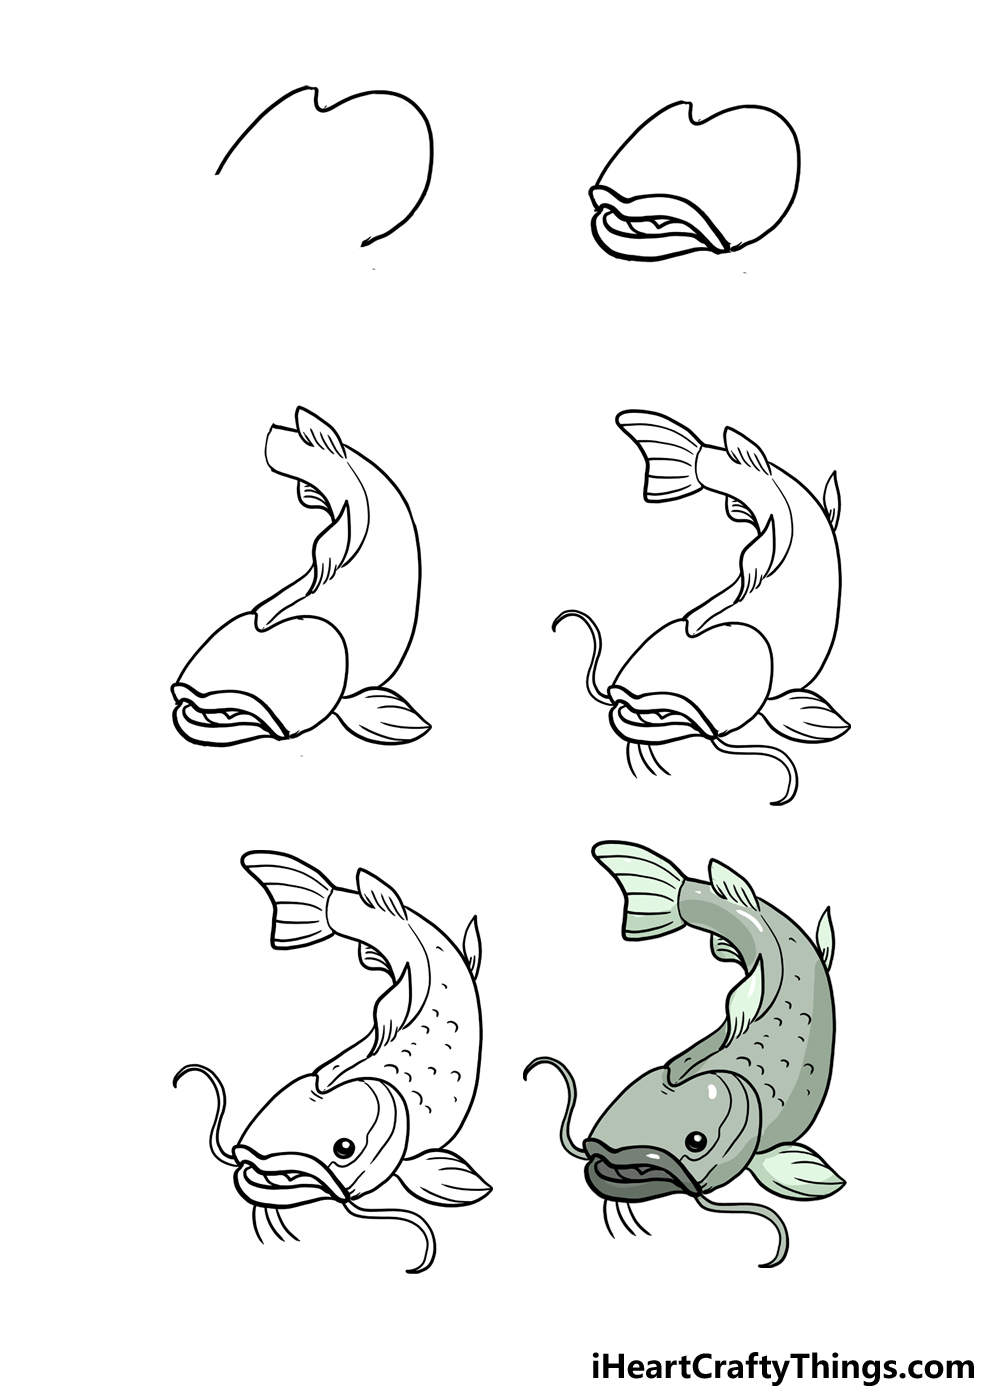 How to Draw A Catfish